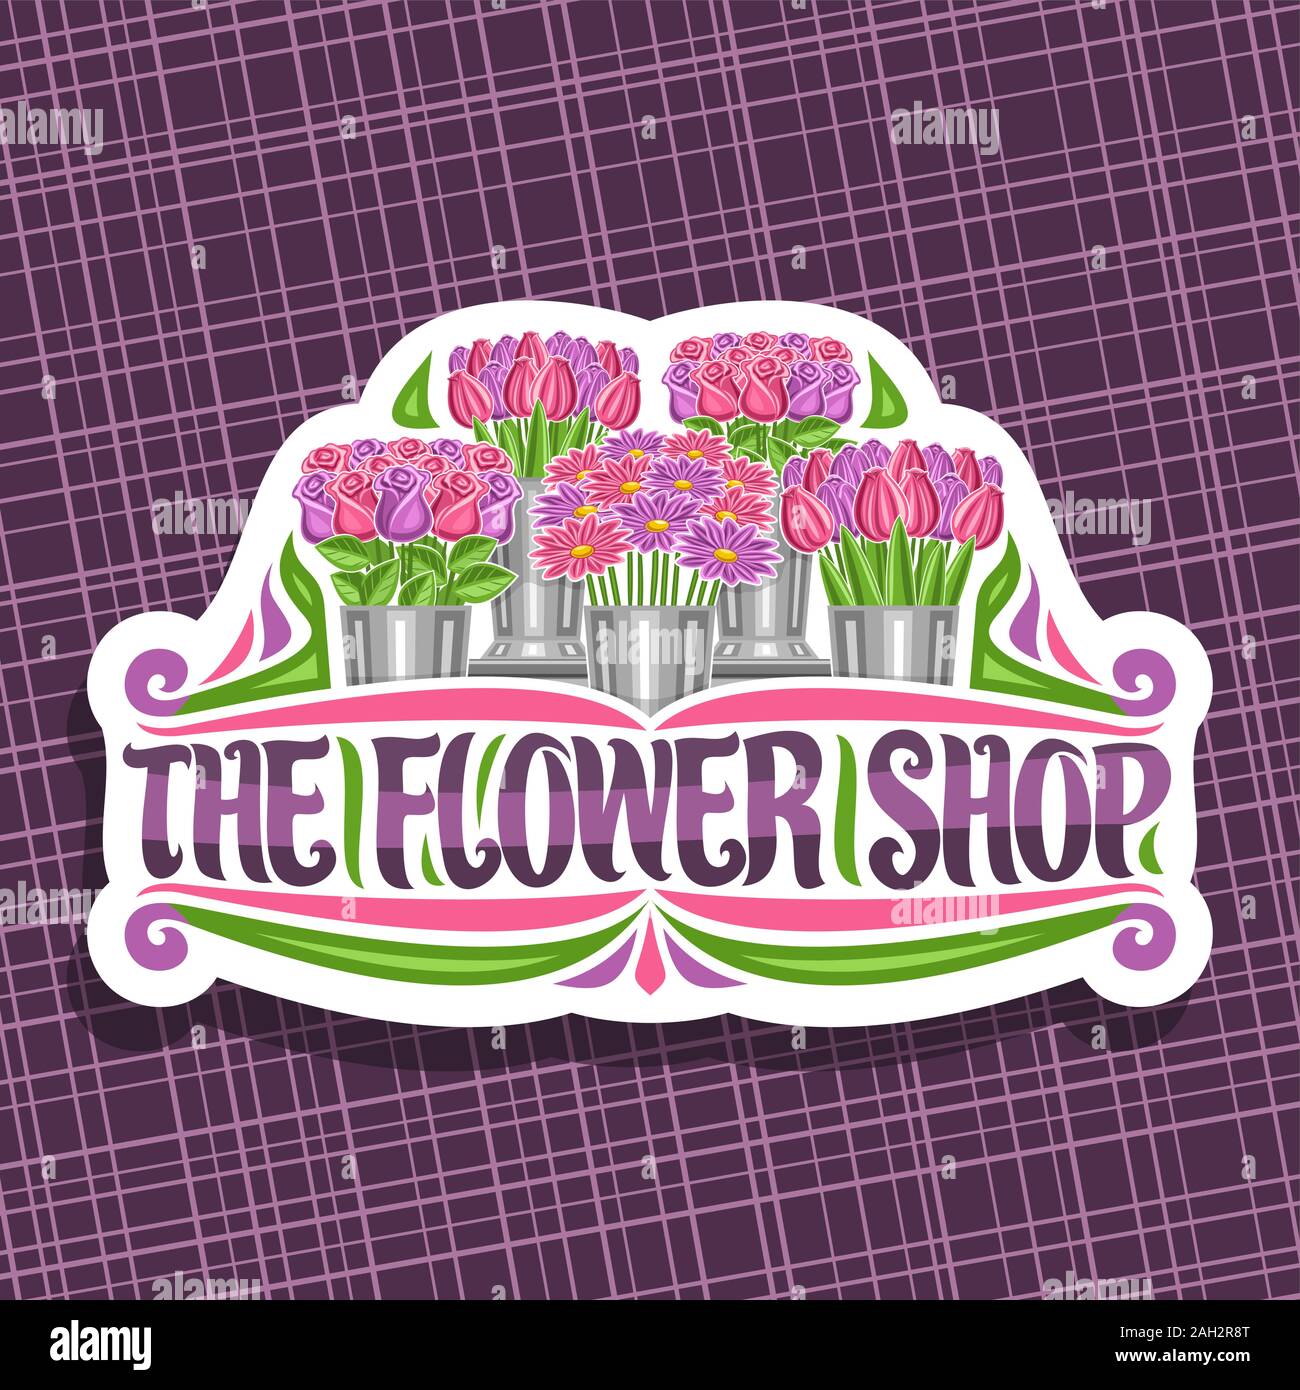 Vector logo for Flower Shop, decorative cut paper label with illustration of spring tulips, purple asters and roses with green leaves in metal bucket, Stock Vector